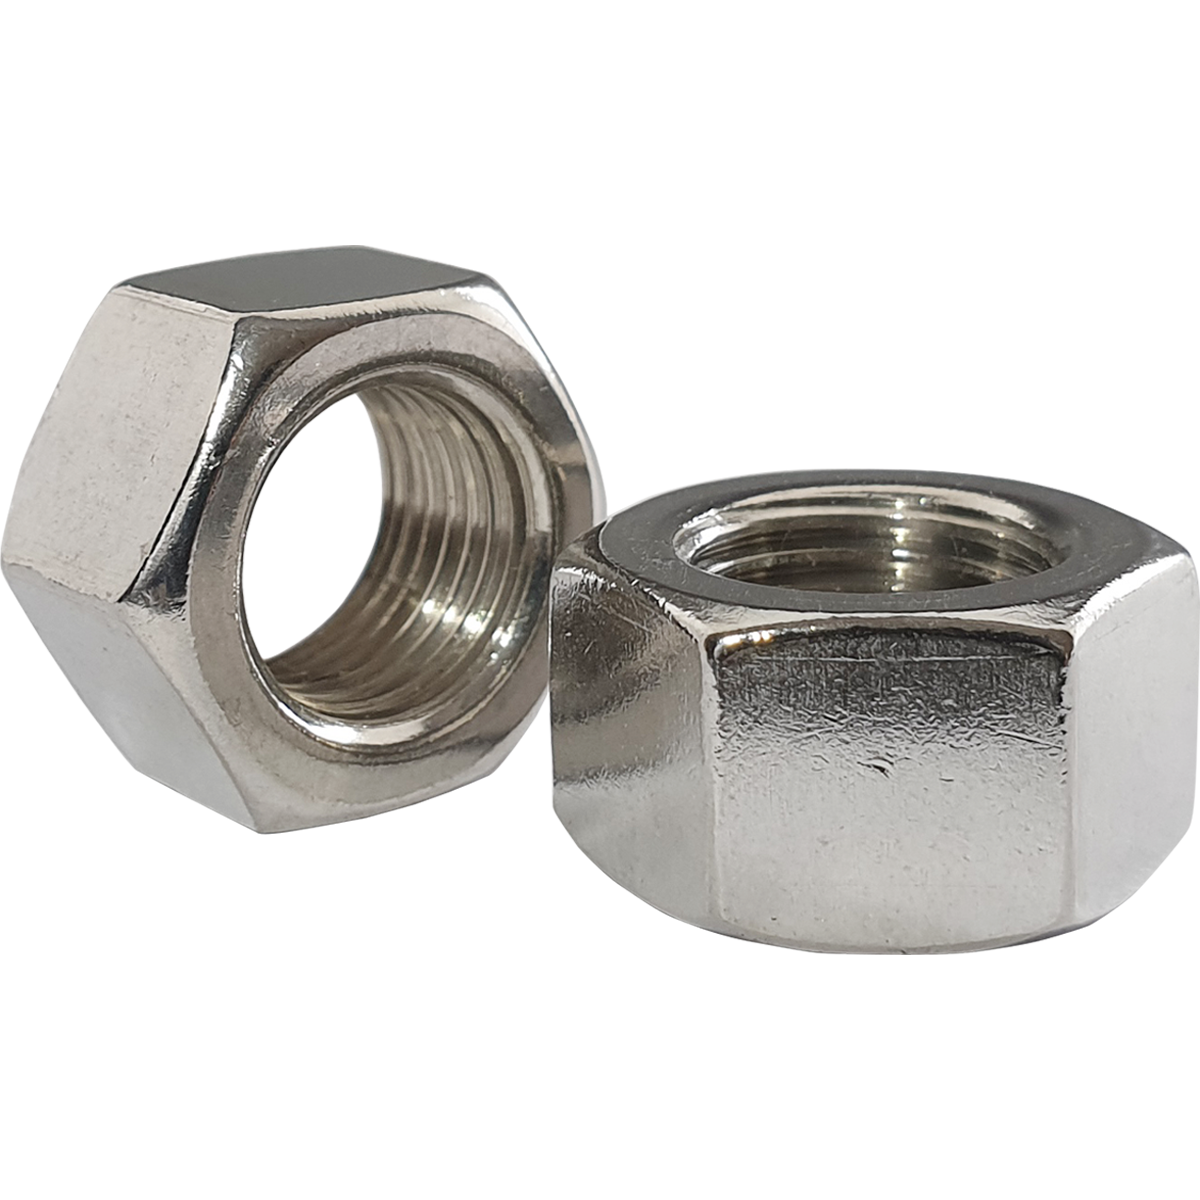 UNC - (Imperial Unified Coarse thread) A2 stainless steel hex nuts. A hexagonal nut with an internal thread also known as hexagon nuts .